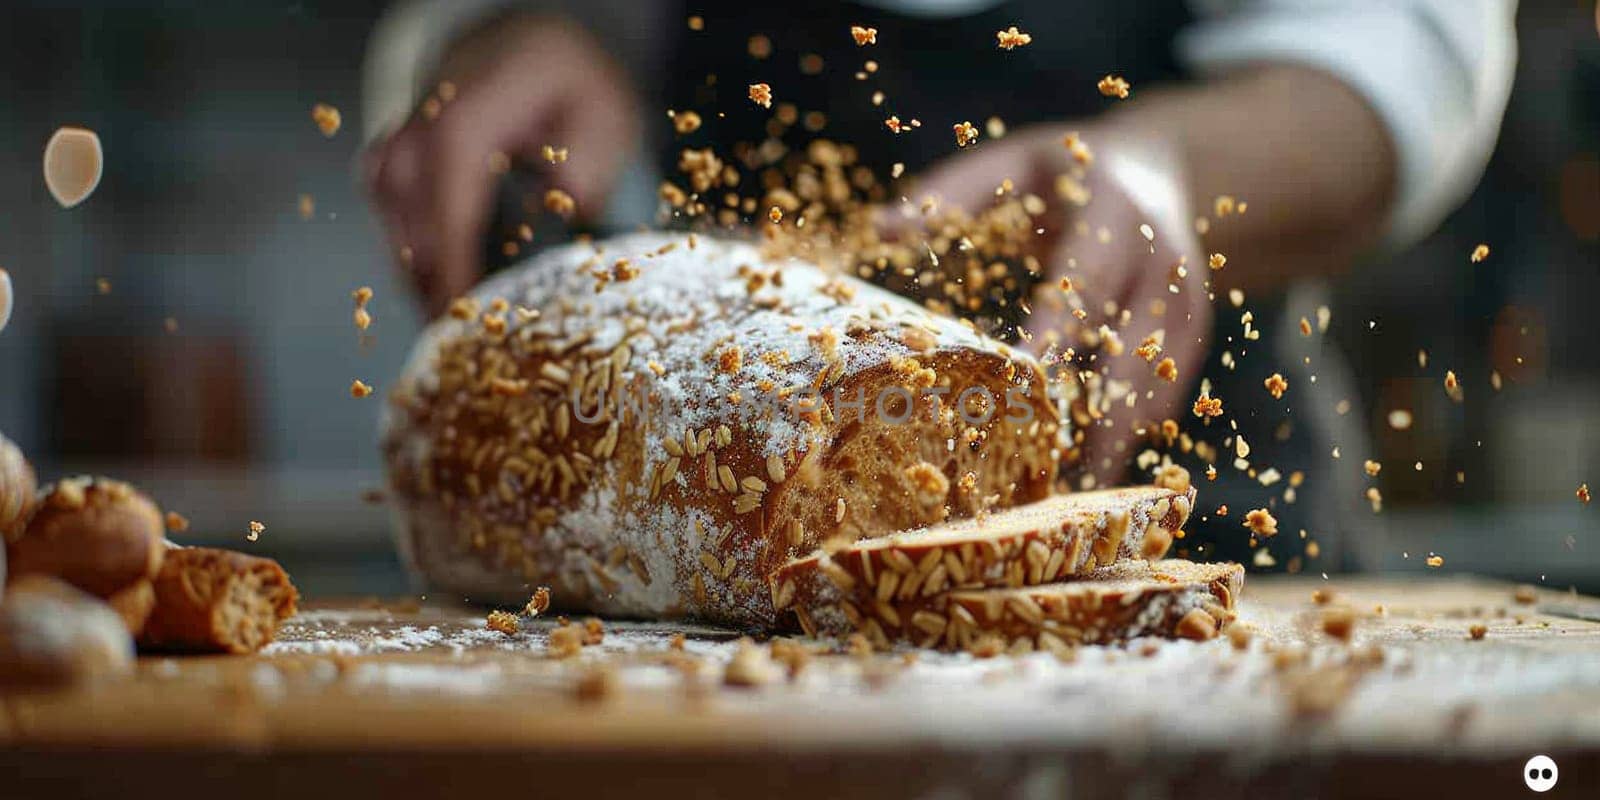 A loaf of bread is being delicately sprinkled with powdered sugar, adding a touch of sweetness and elegance to the baked goods.